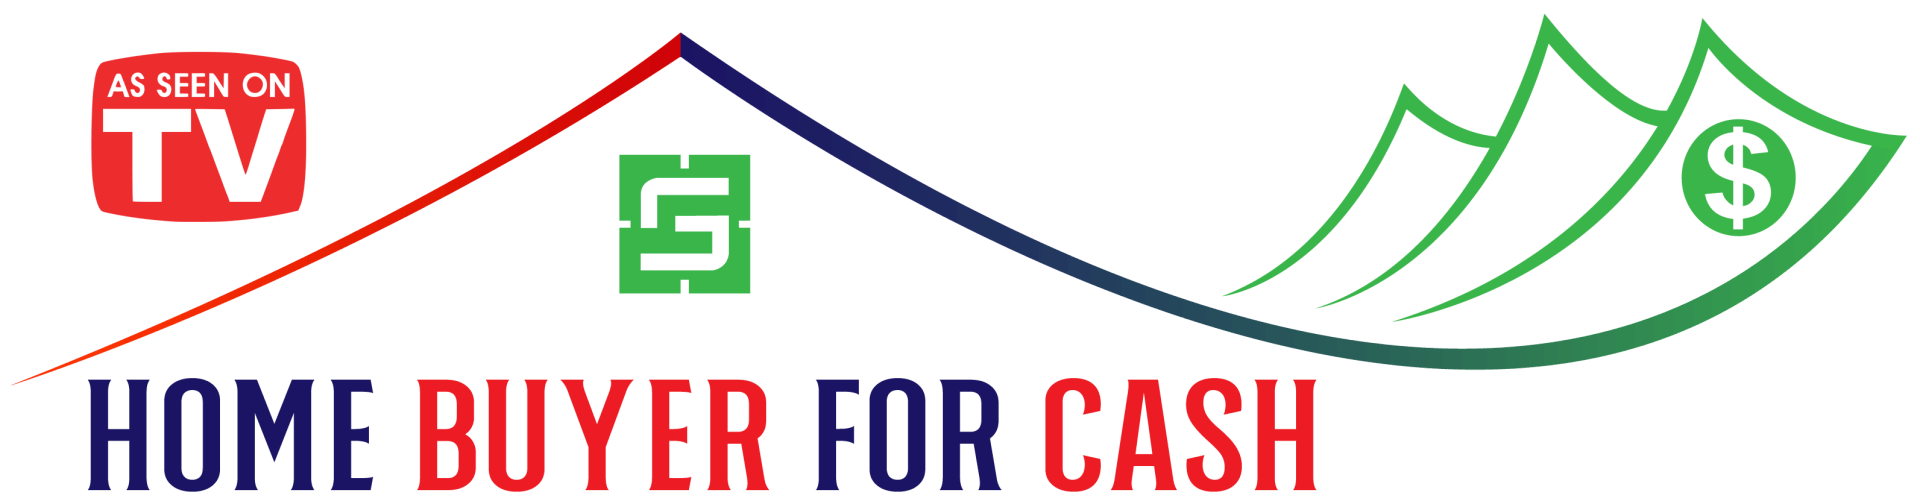 Home buyer For Cash